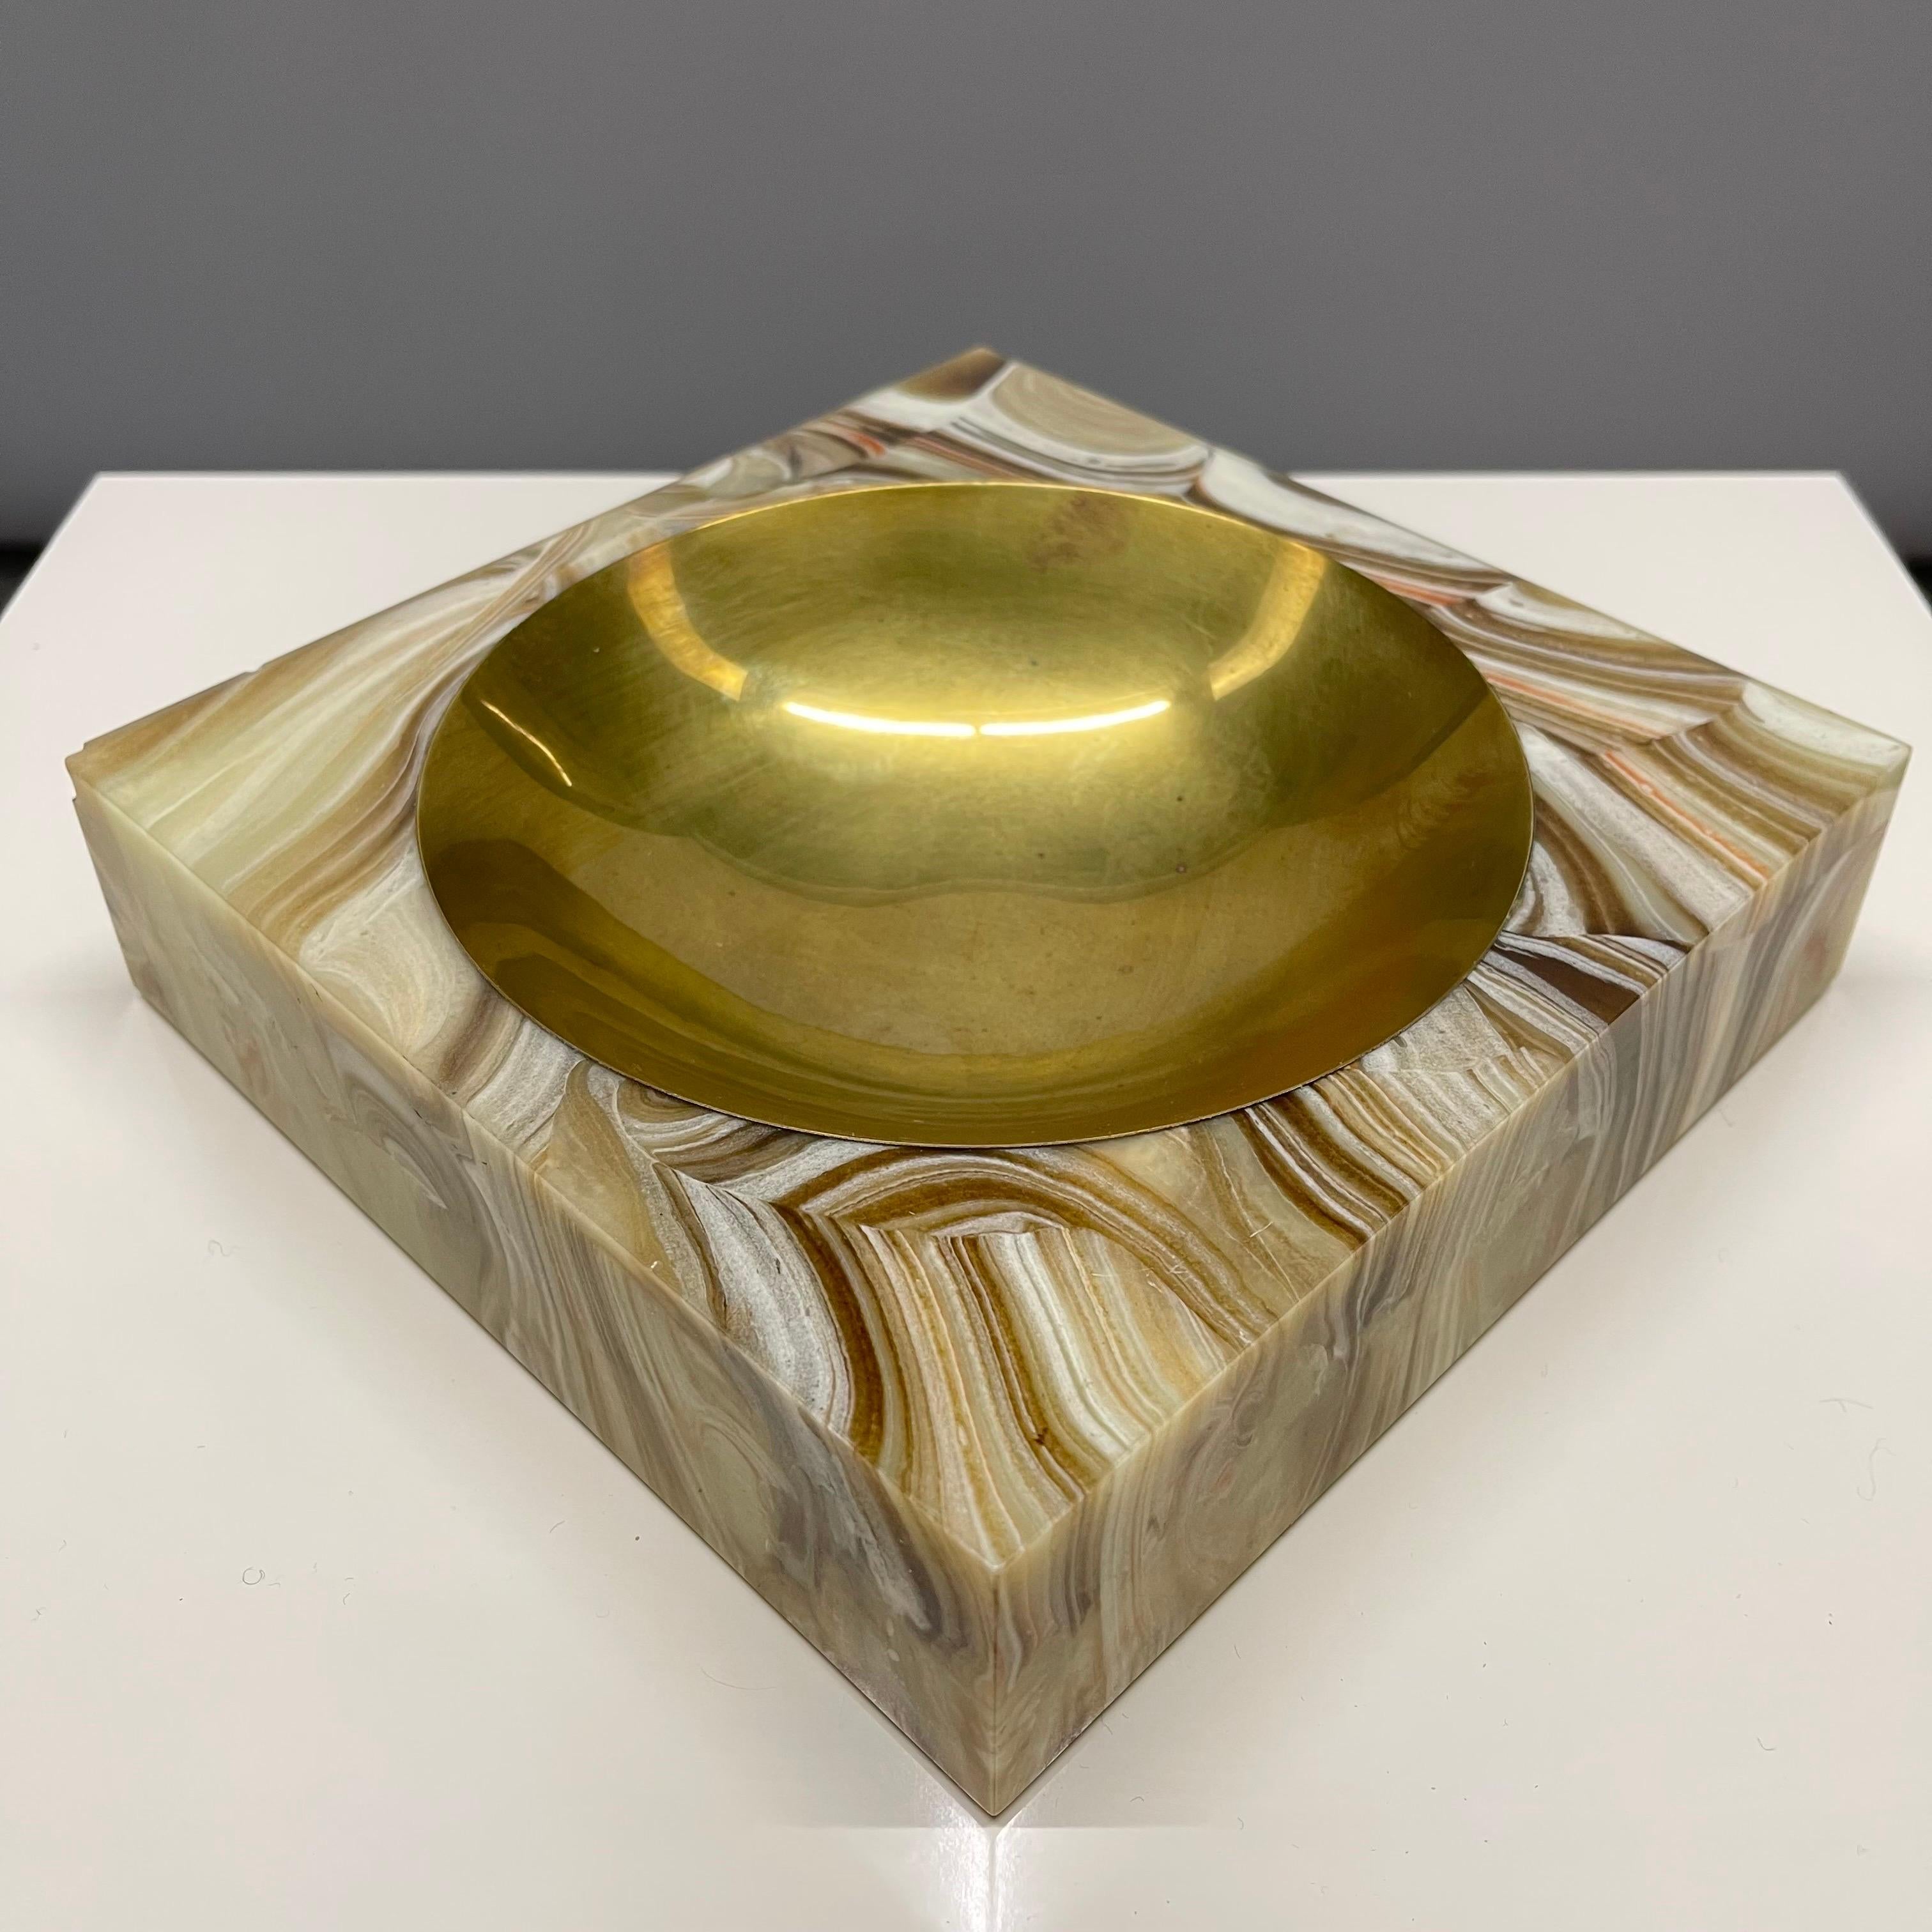 Stunning Italian mid-century Vide Poche or catchall or ashtray dish rendered in marbleized resin with an inset polished brass dish and green felt backing. Made in Italy, circa 1970s.